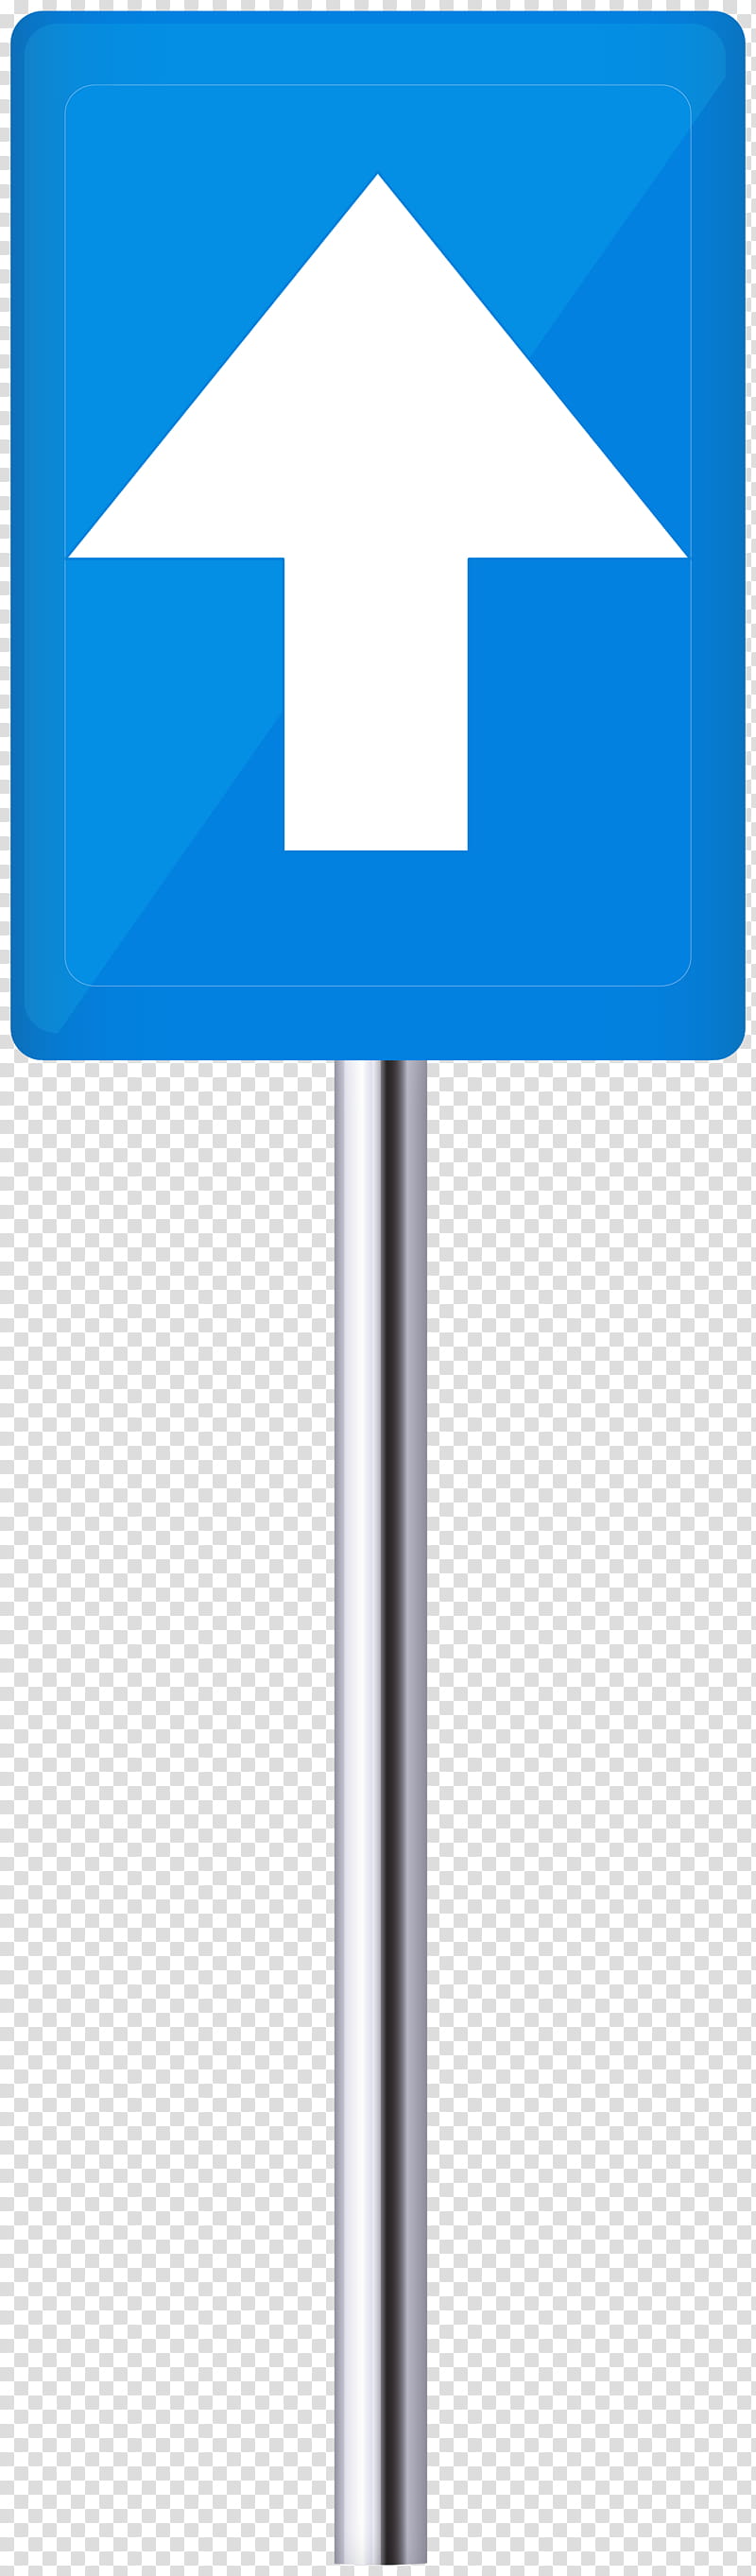 Street Sign, Traffic Sign, Road, Oneway Traffic, Line, Signage, Angle, Triangle transparent background PNG clipart